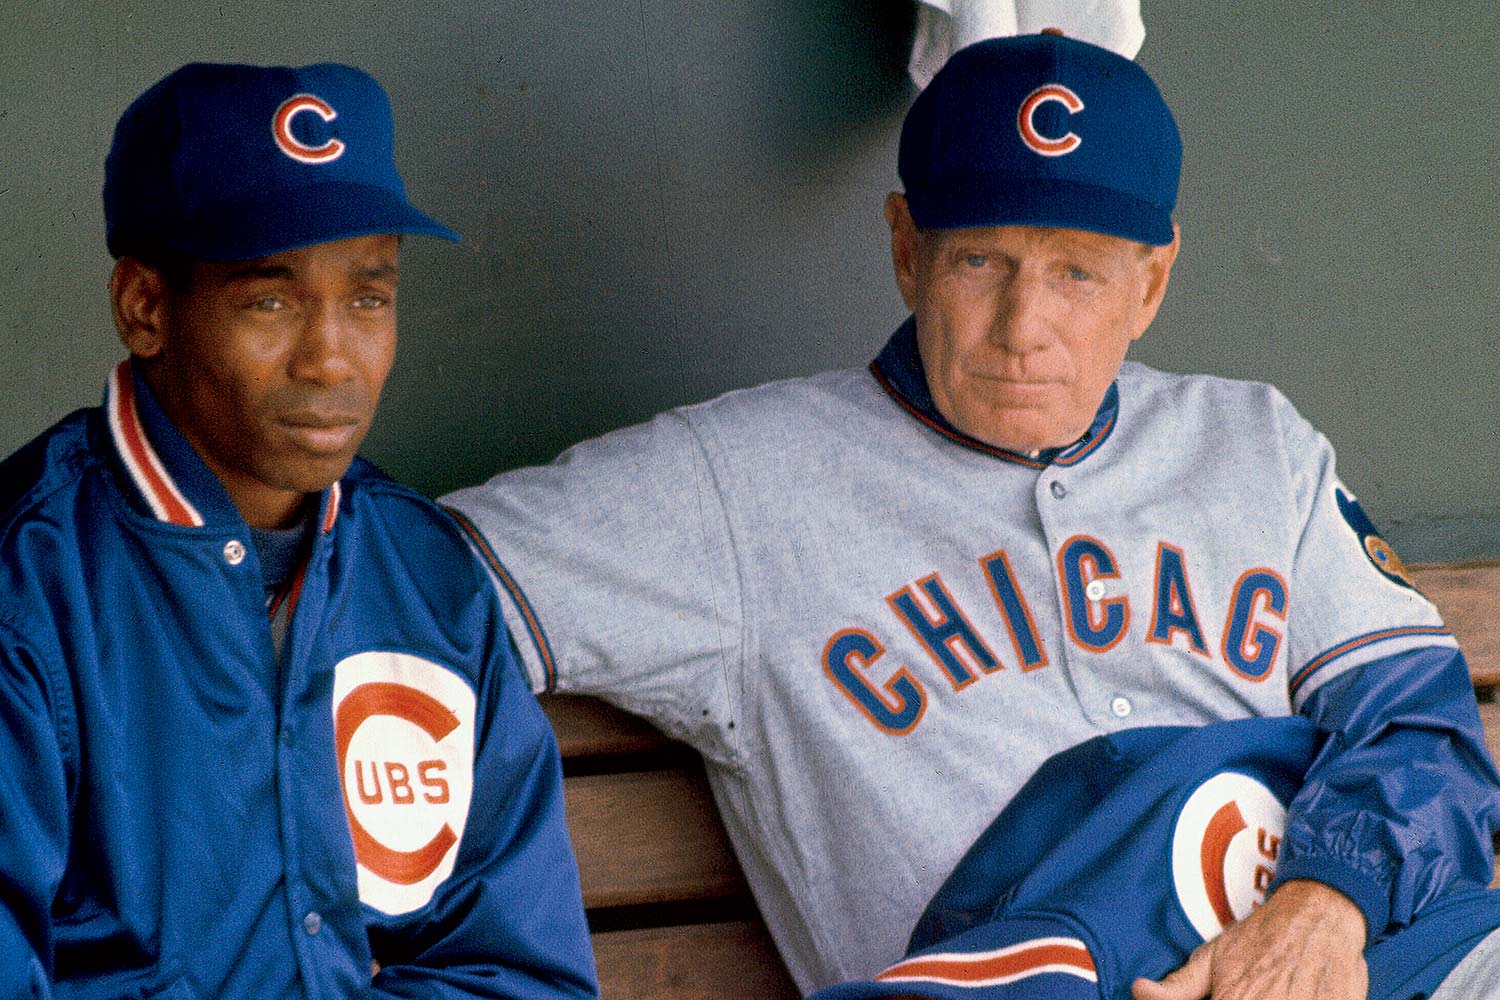 Did you know: Ernie Banks facts and figures